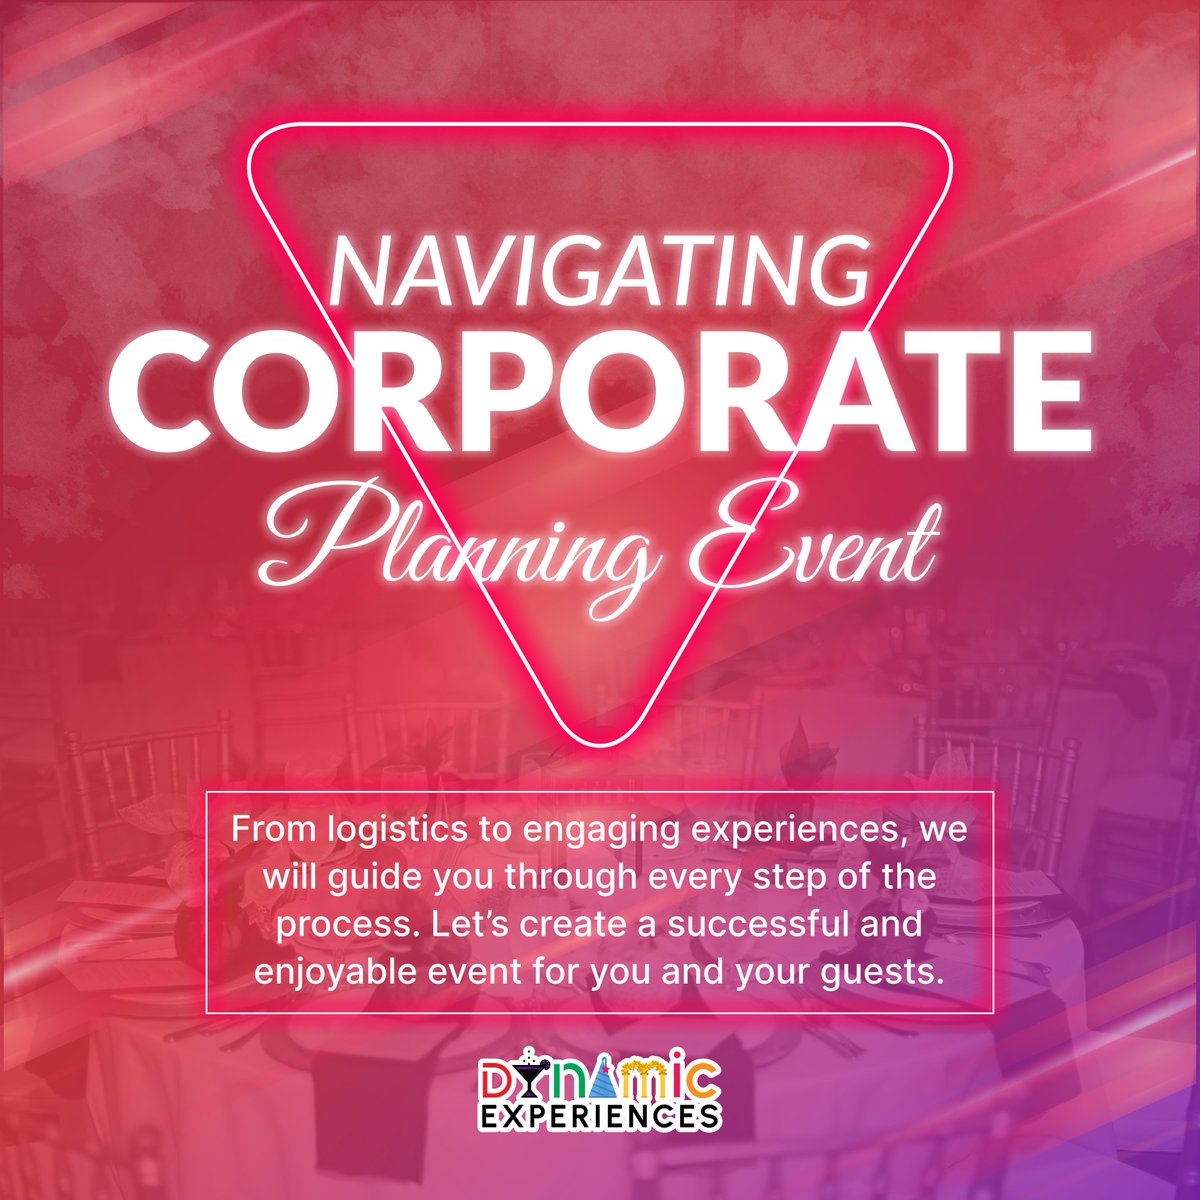 From logistics to engaging experiences, we will guide you through every step of the process. Let’s create a successful and enjoyable event for you and your guests.
 
#CraftingExperiences #ExceptionalServices #DynamicHospitality #DynamicExperiences